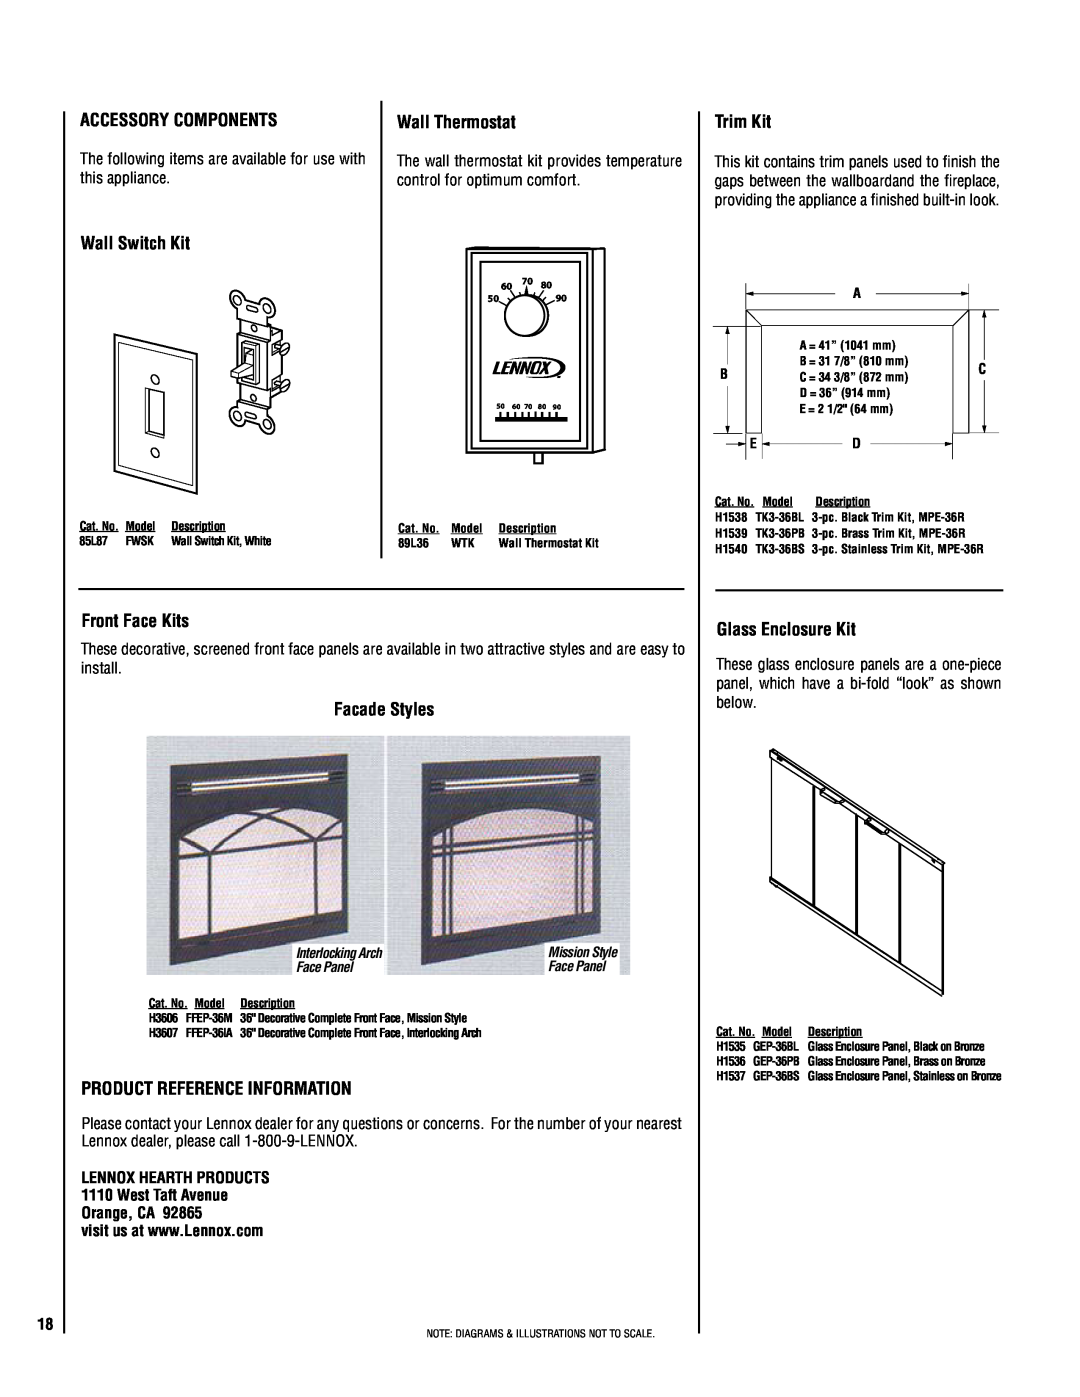 Lennox Hearth MPE-36R Accessory Components, Wall Switch Kit, Wall Thermostat, Trim Kit, Front Face Kits, Facade Styles 